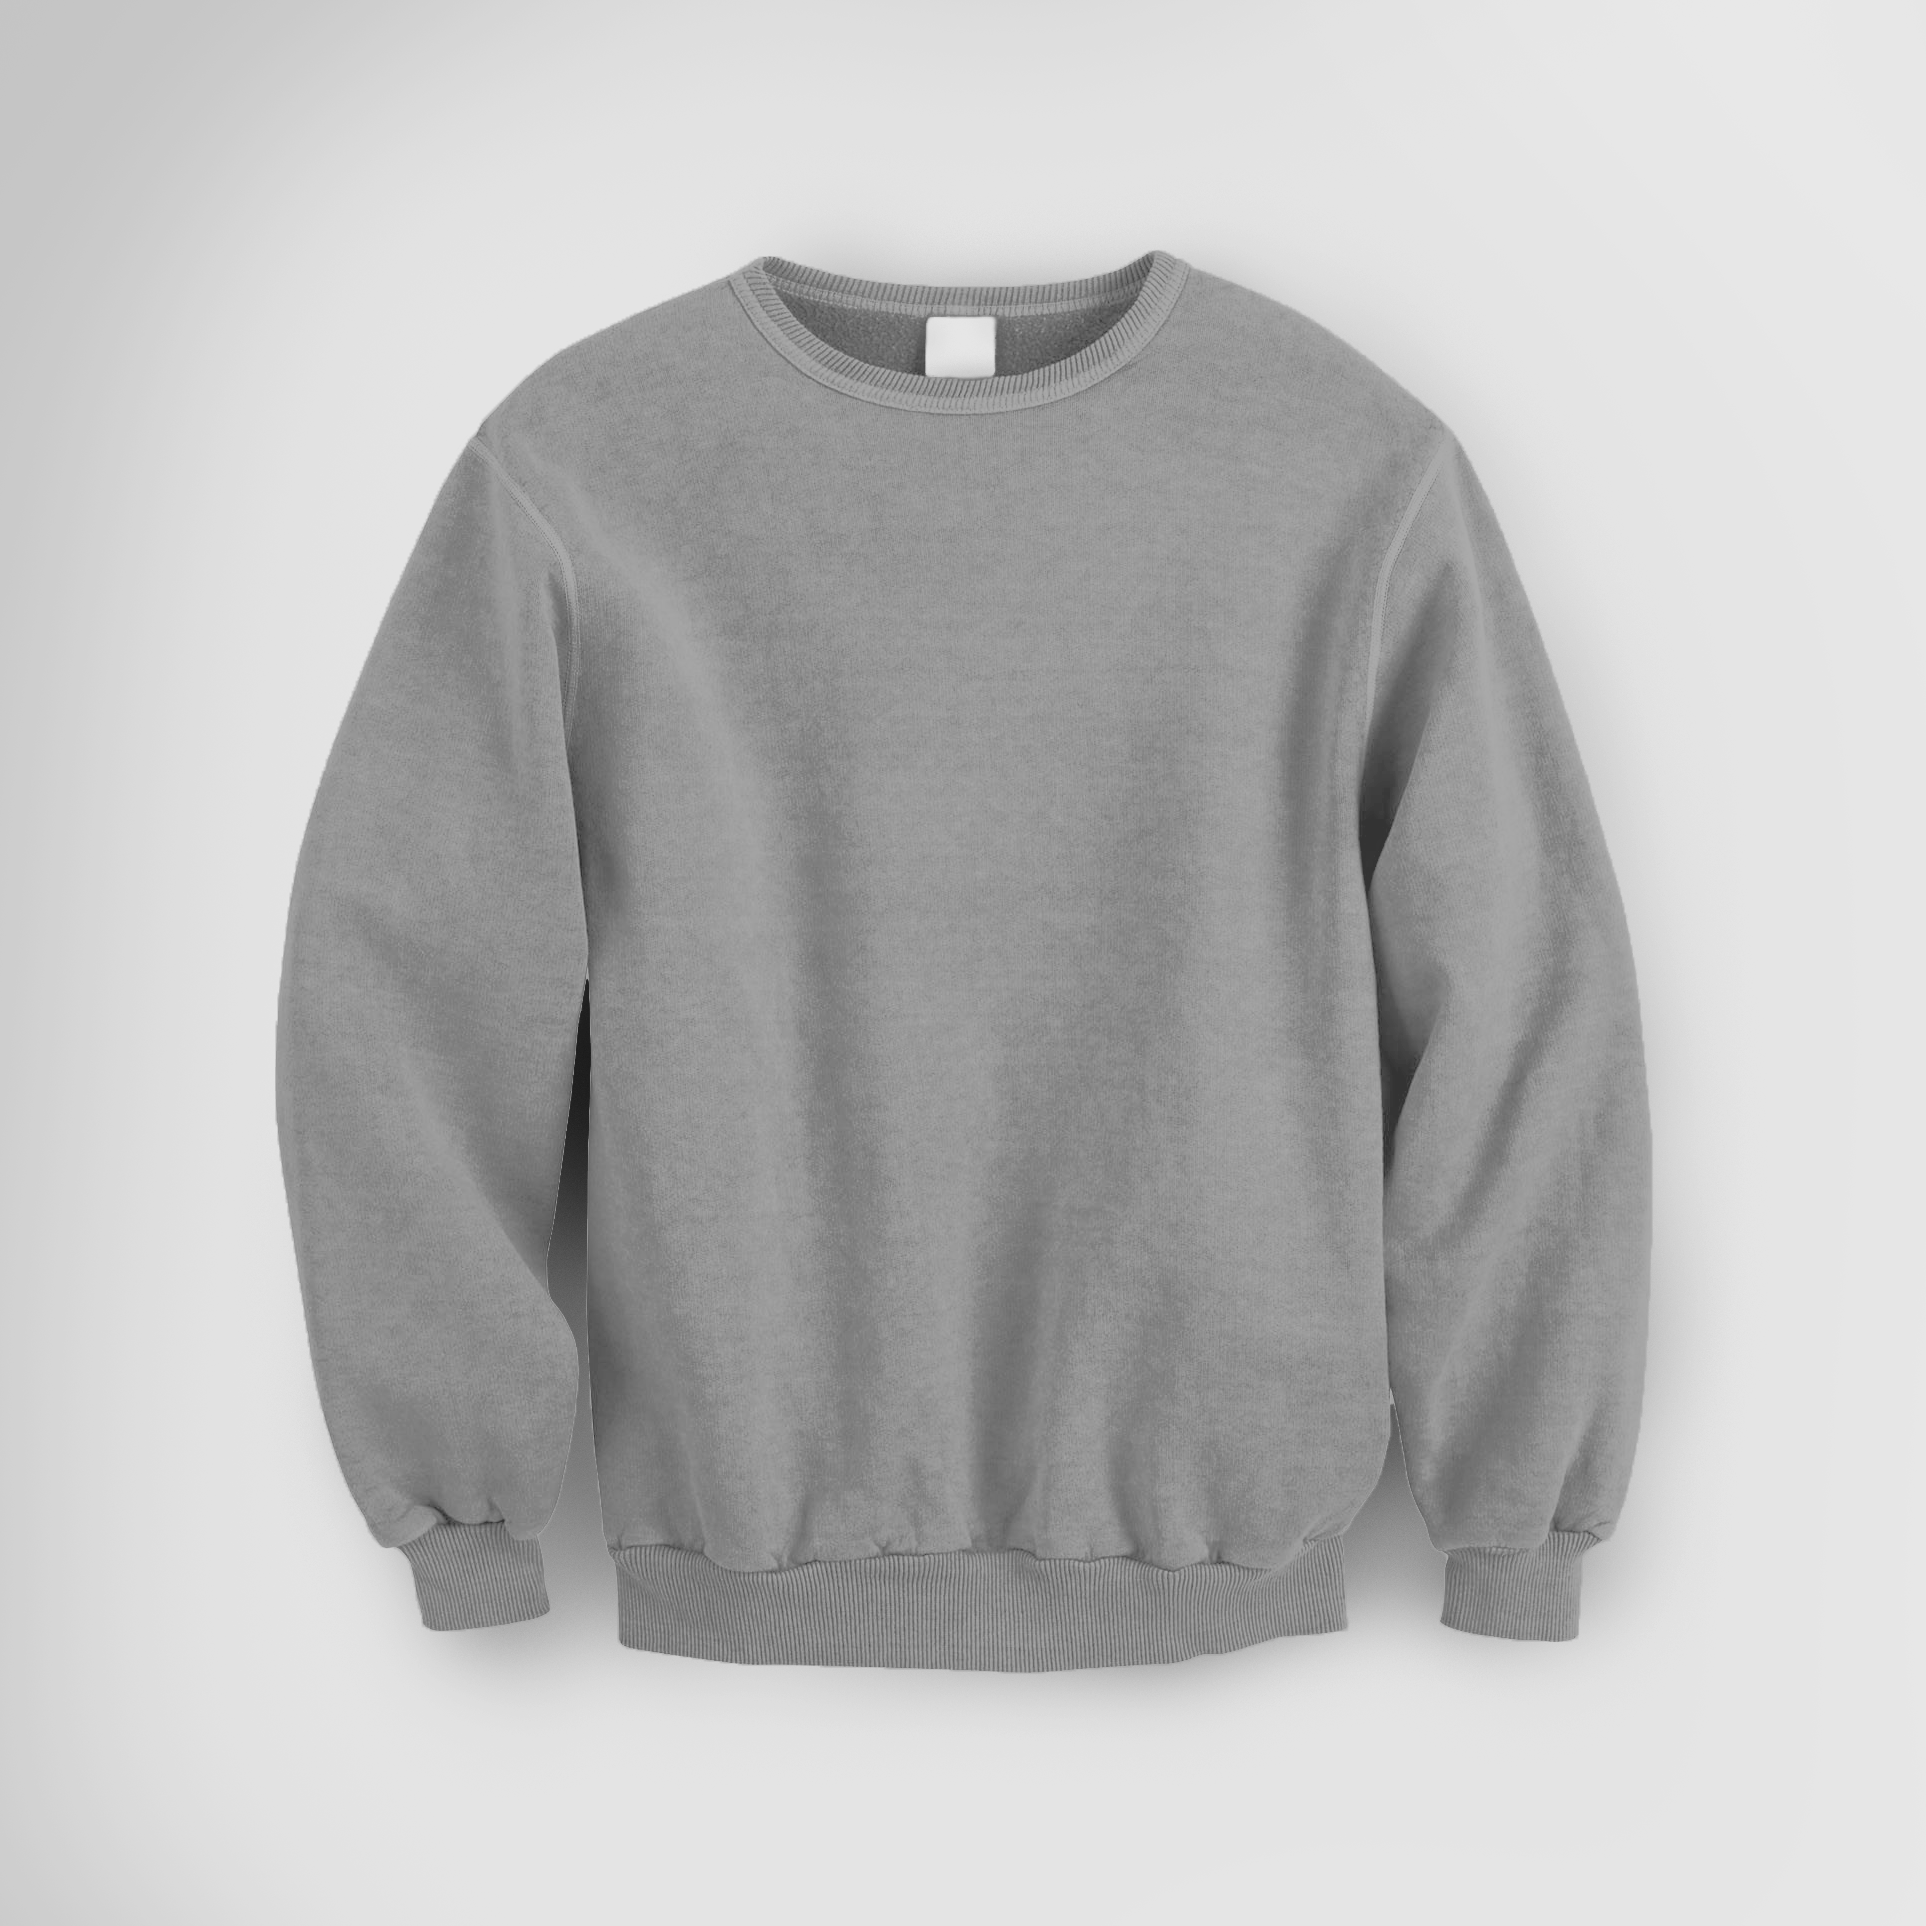 Download Crew Neck Sweater Mock Up - TheApparelGuy